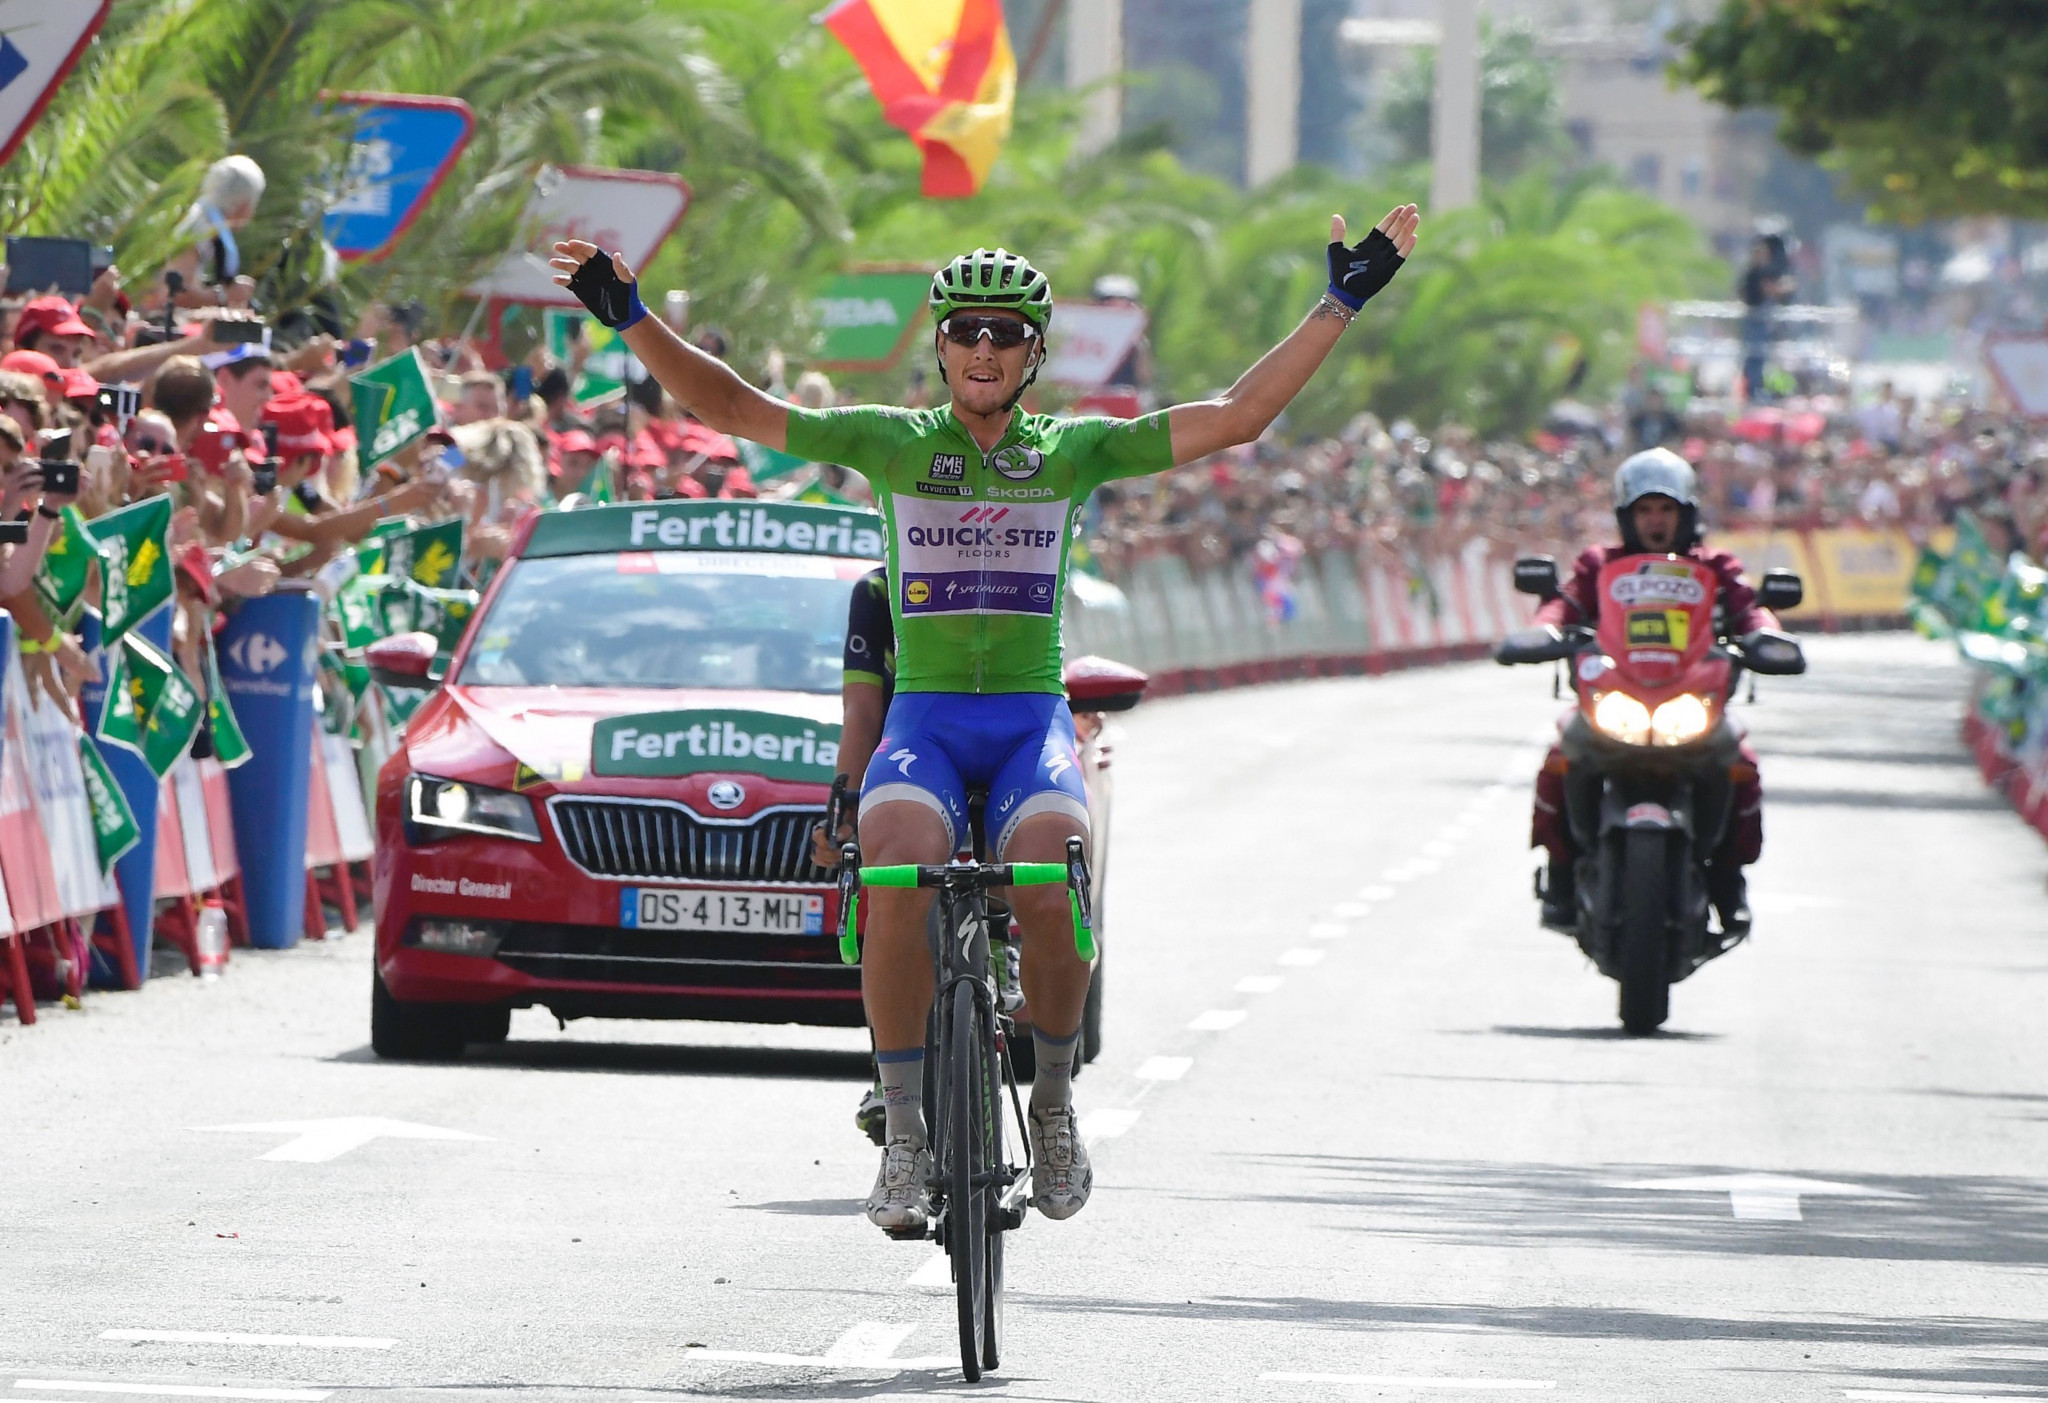 Trentin wins his second Vuelta stage as Froome maintains lead